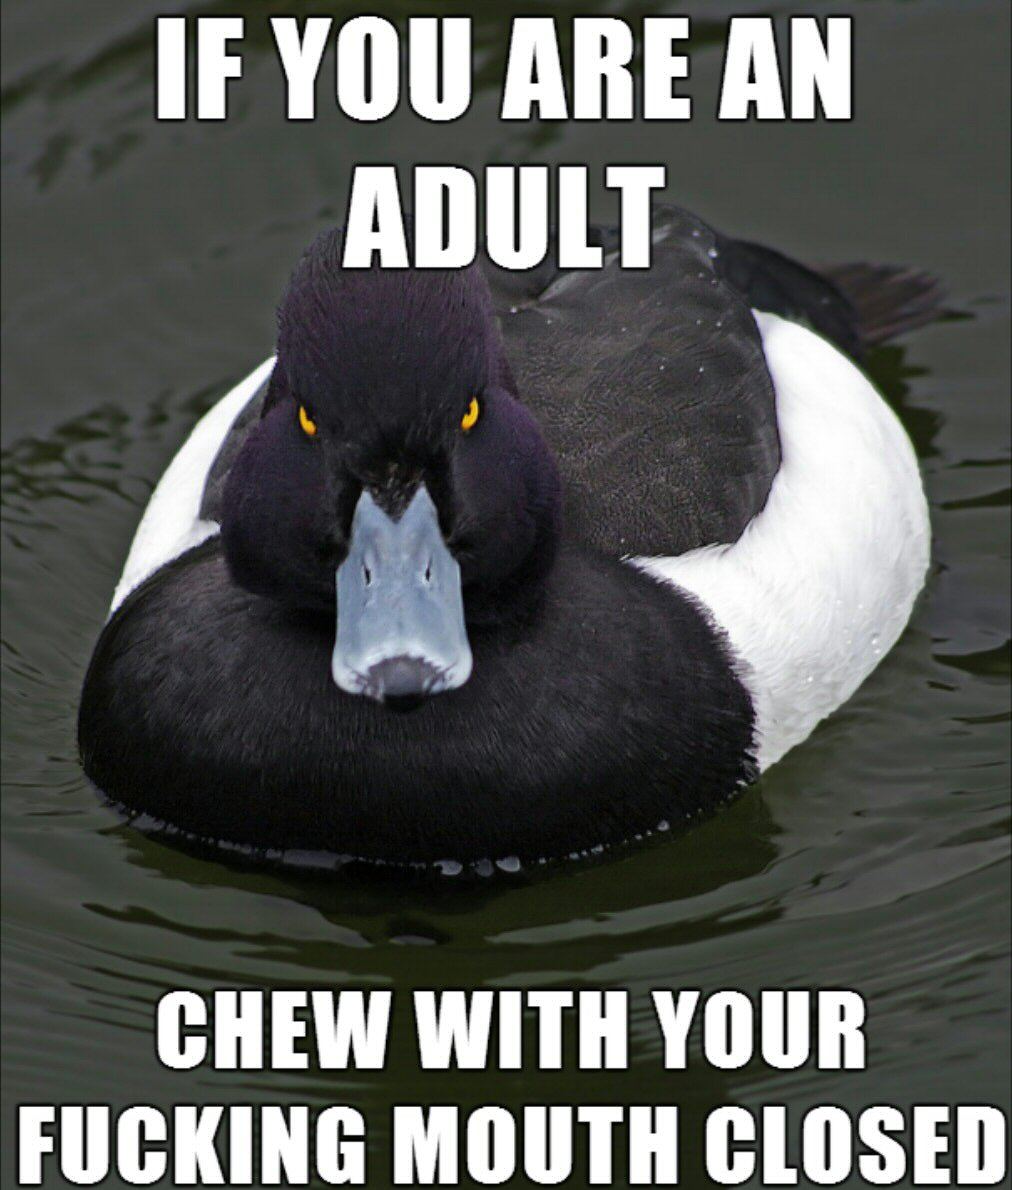 angry duck is angry - meme